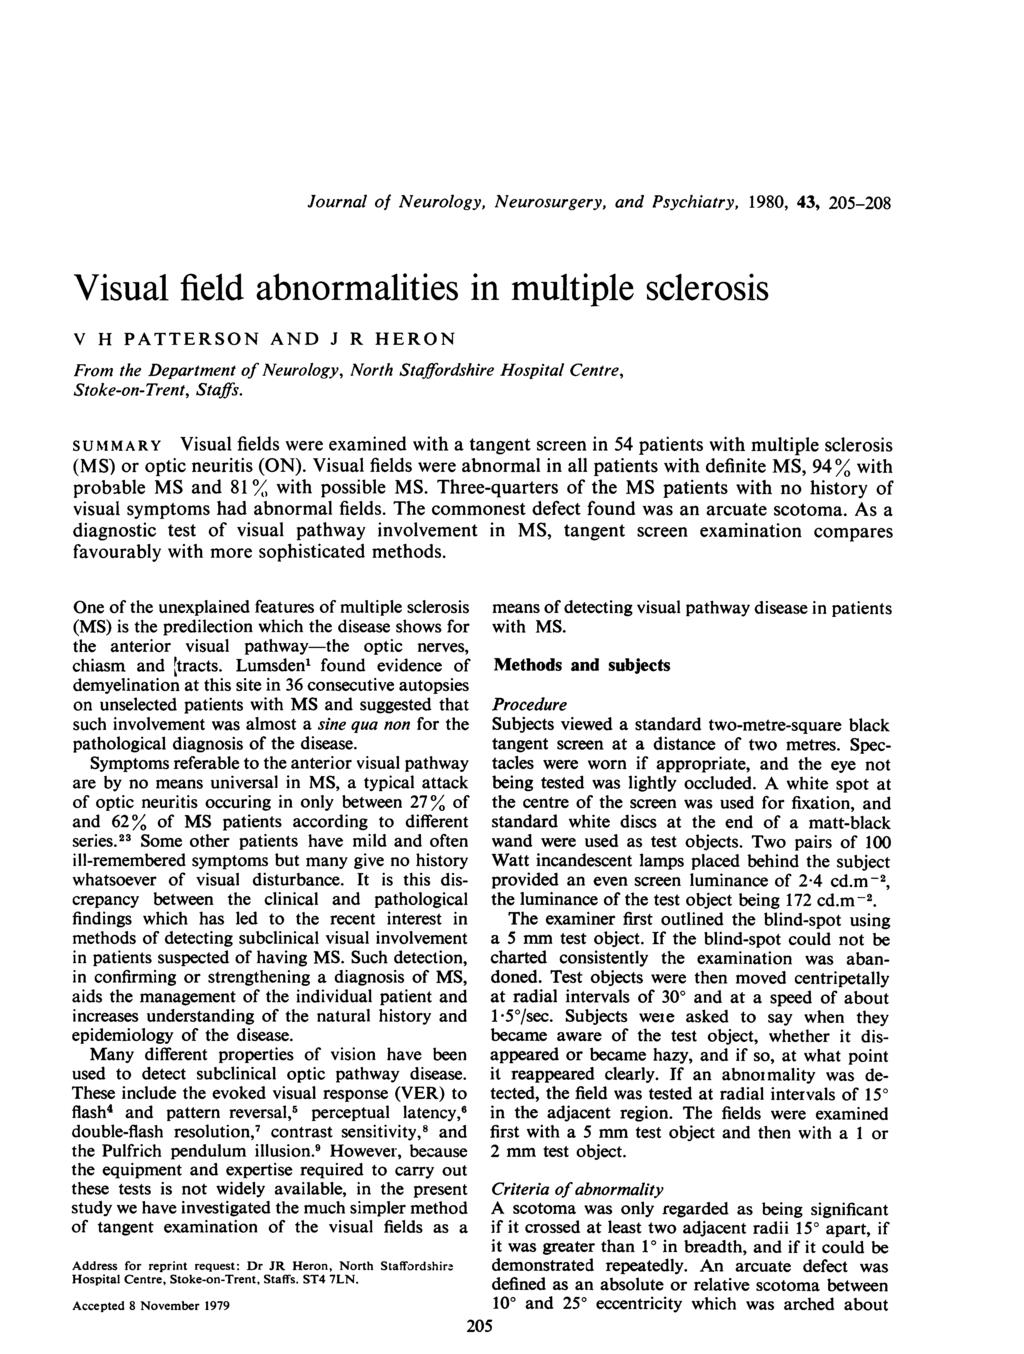 Journal of Neurology, Neurosurgery, and Psychiatry, 1980, 43, 205-208 Visual field abnormalities in multiple sclerosis V H PATTERSON AND J R HERON From the Department of Neurology, North